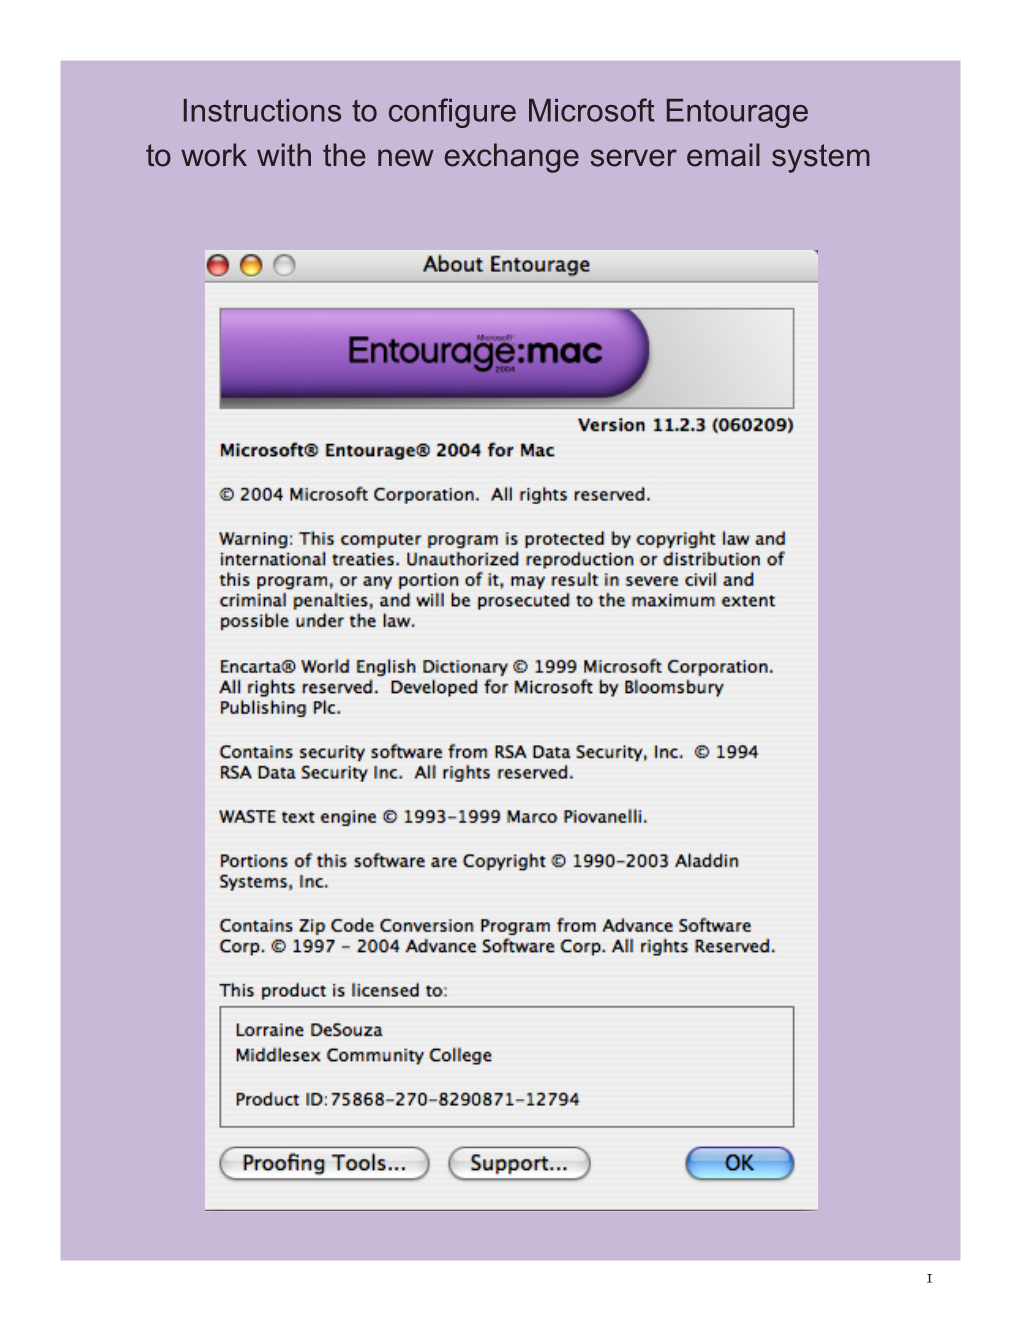 Instructions to Configure Microsoft Entourage to Work with the New Exchange Server Email System